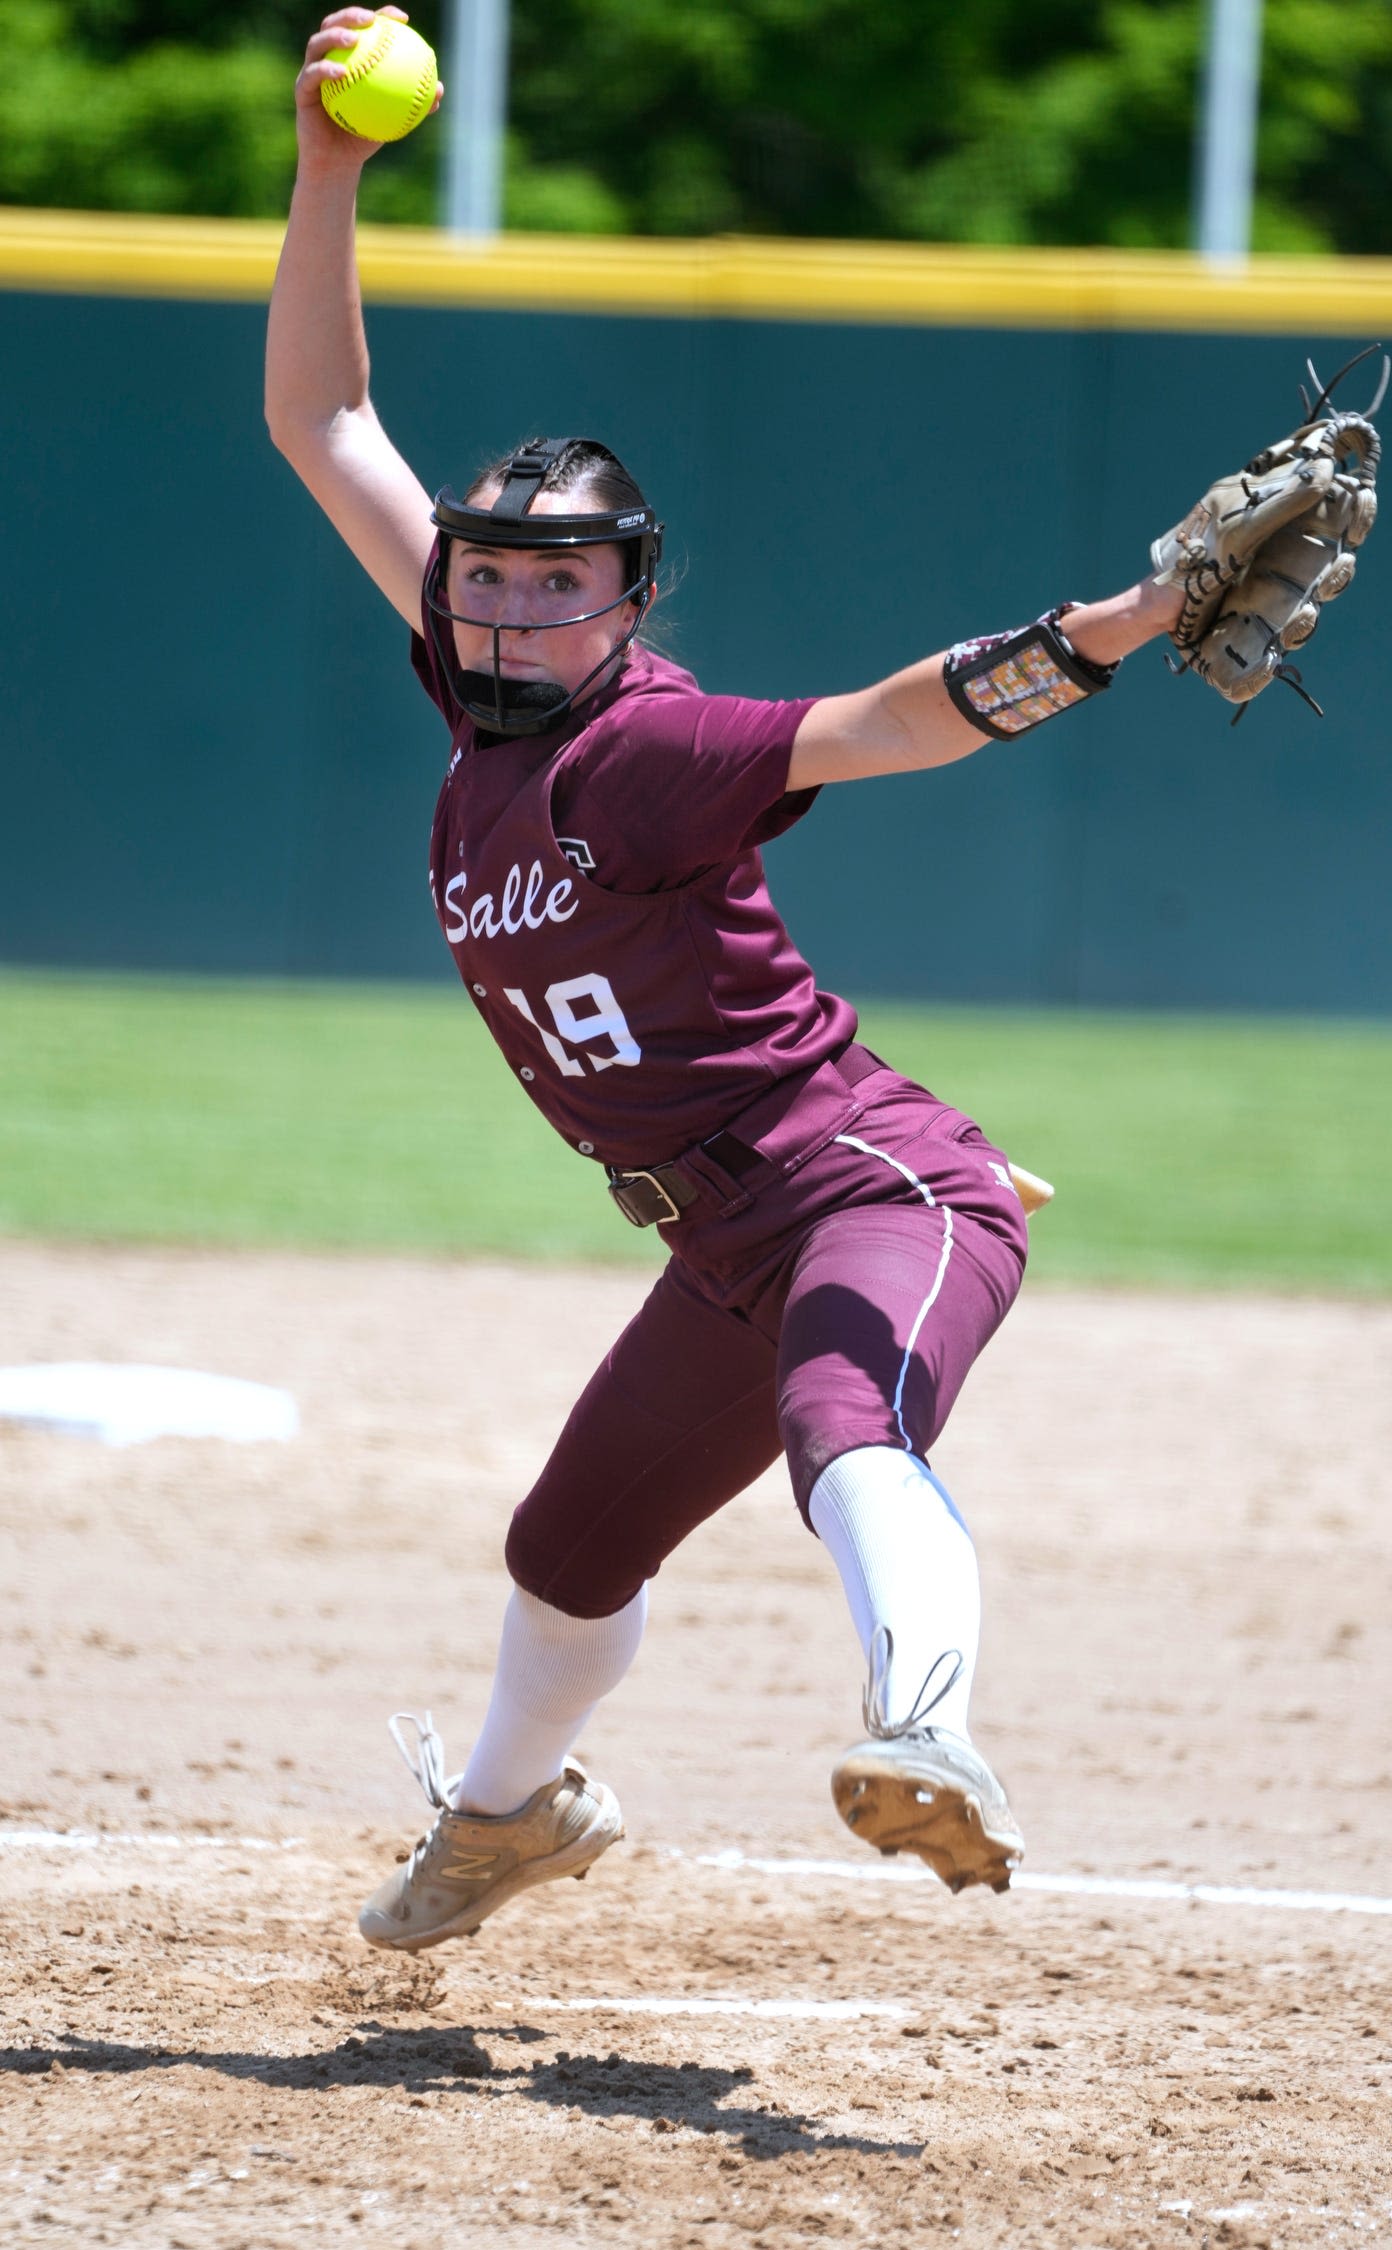 La Salle softball trails briefly before booking a second consecutive title game berth